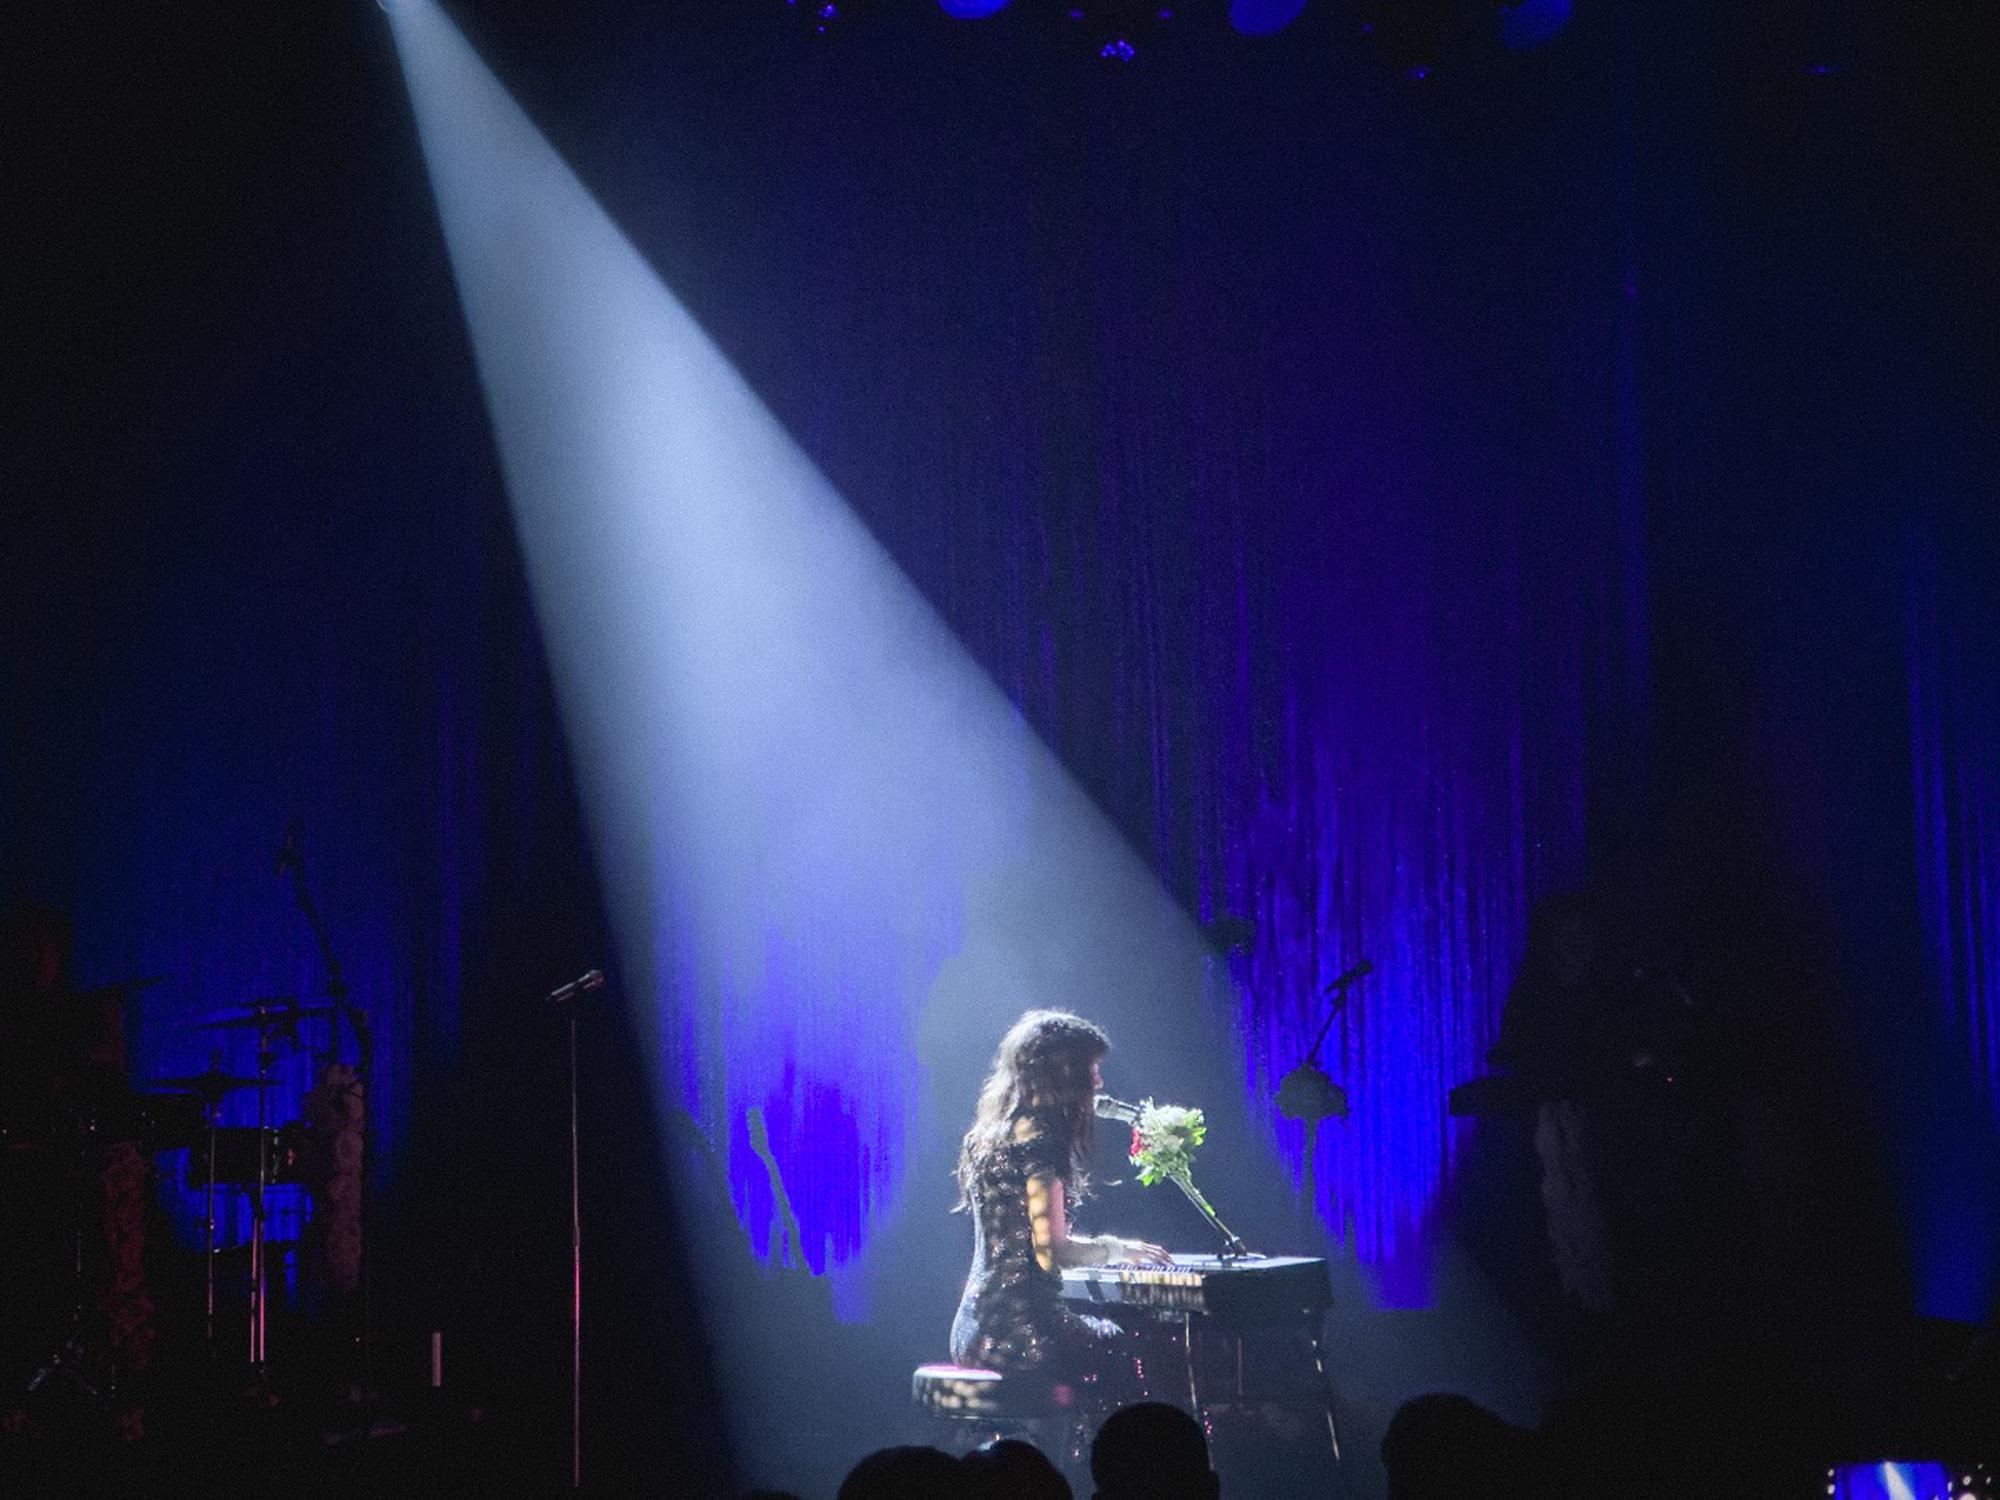 Lauren Mayberry playing the Piano at Koko